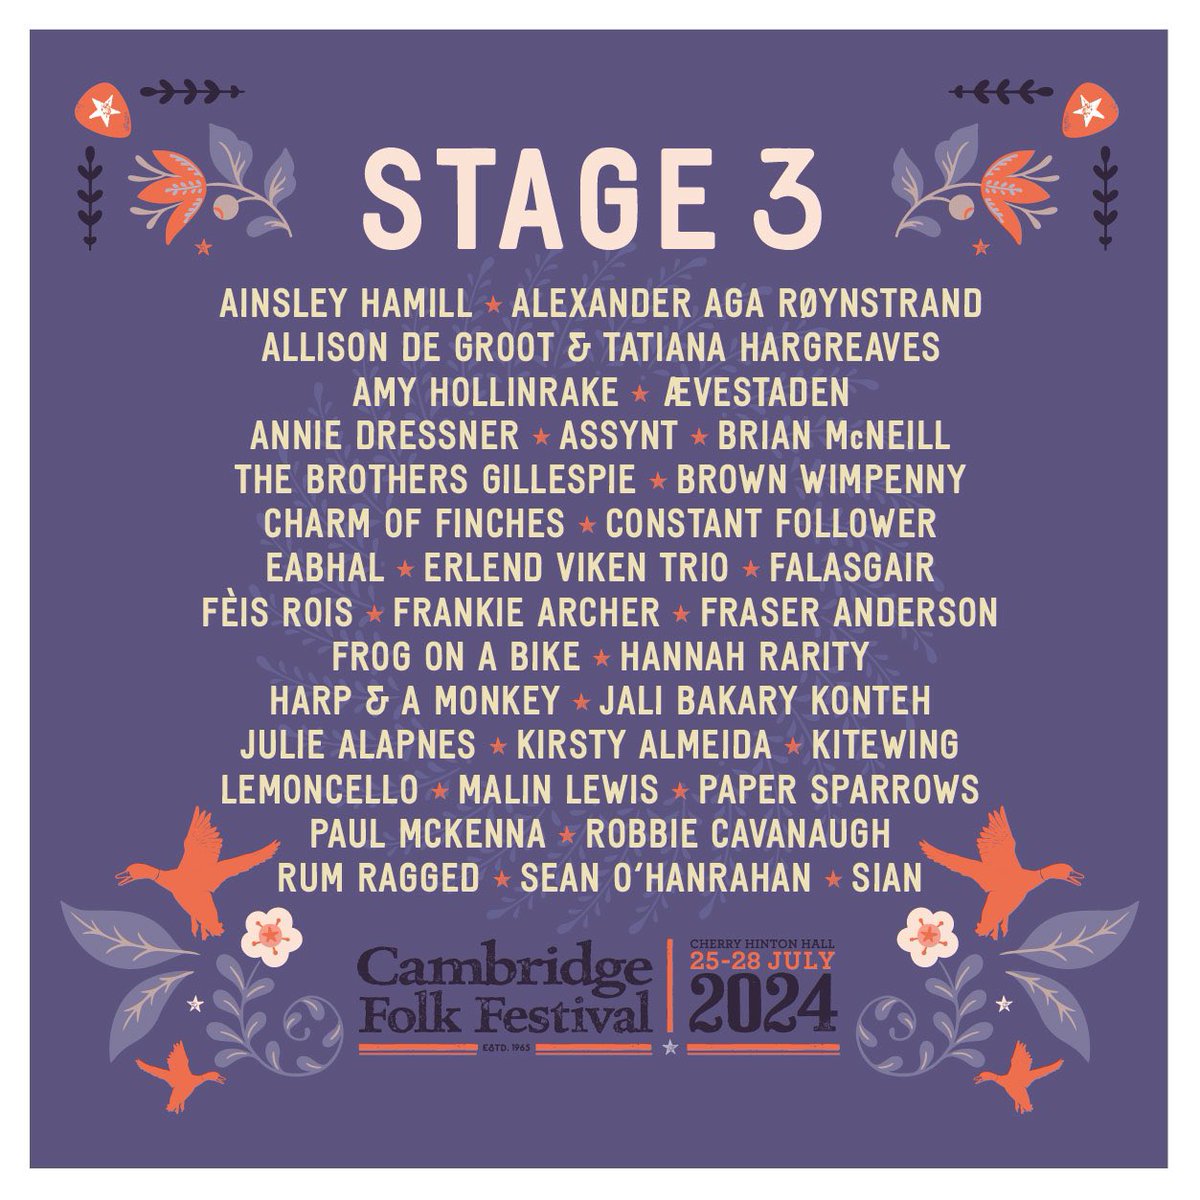 I’m over the moon to be heading to the @CamFolkFest this year. I’ll be playing on the Saturday and I’ll be joined with the amazing @samkellymusic & @TobyShaer Tickets here 💙 cambridgelive.org.uk/folk-festival/… Dates are 25-28 July 24 #CFF2024